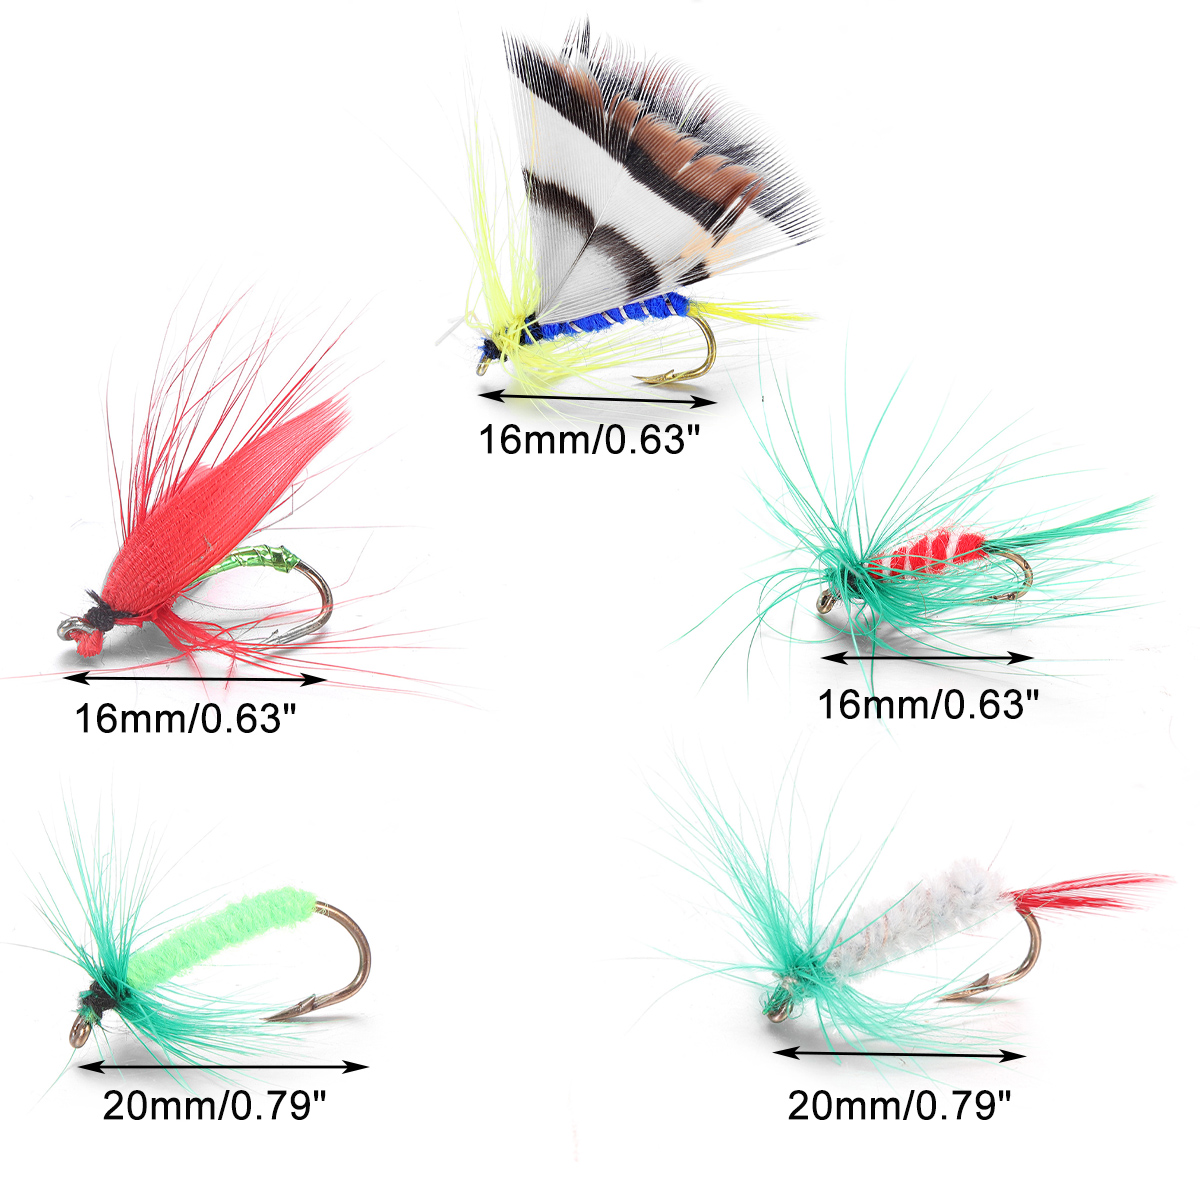 ZANLURE-20-Pcs-Fishing-Lures-Portable-Metal-Fly-Hook-Used-for-Trout-Freshwater-Saltwater-Outdoor-Fis-1837798-2